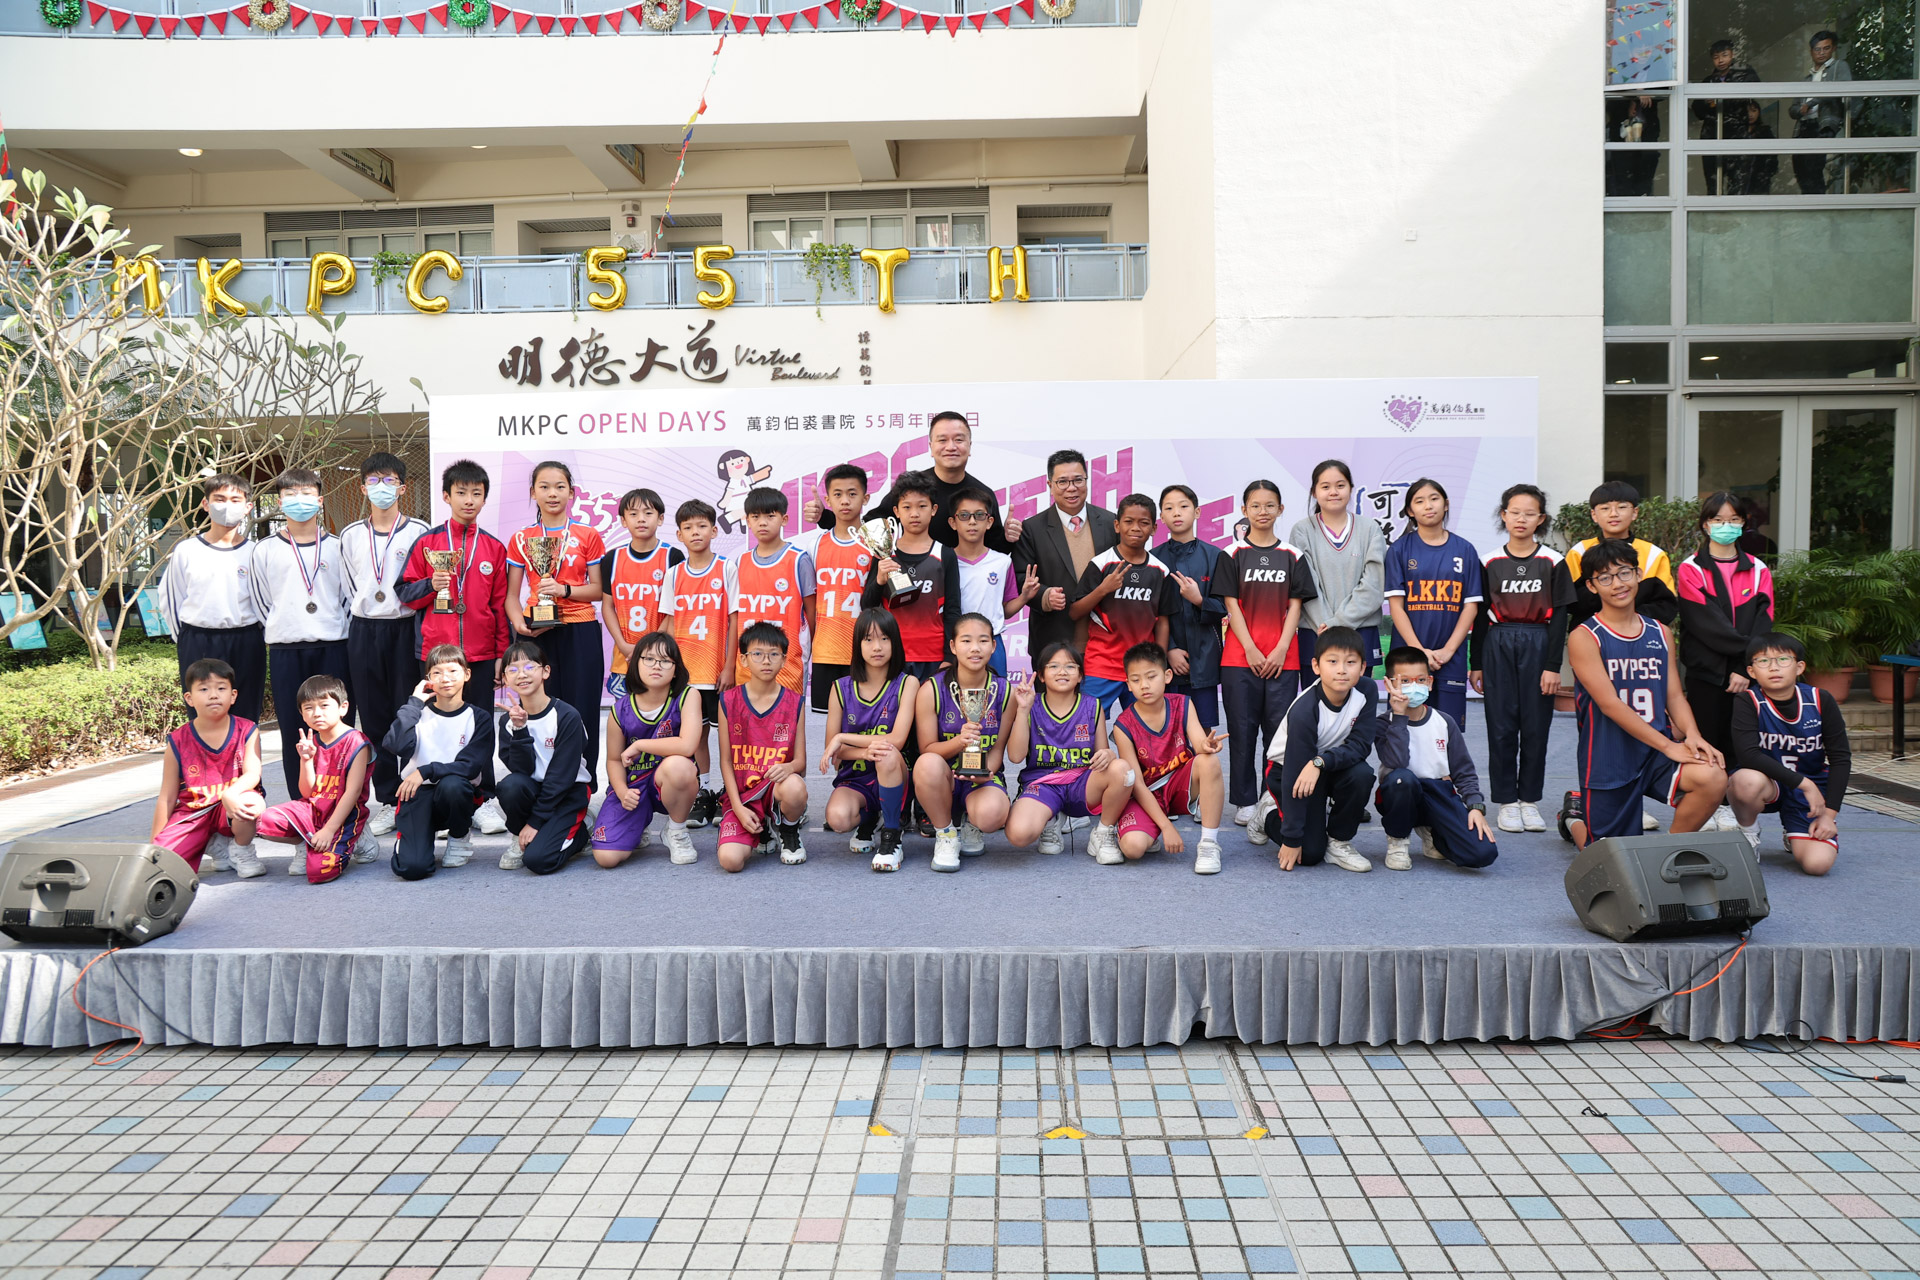 55th Anniversary School Open Day –  “Dare to Dream Primary Schools Sports Day” & Opening Ceremony of MKPC FitTech Centre